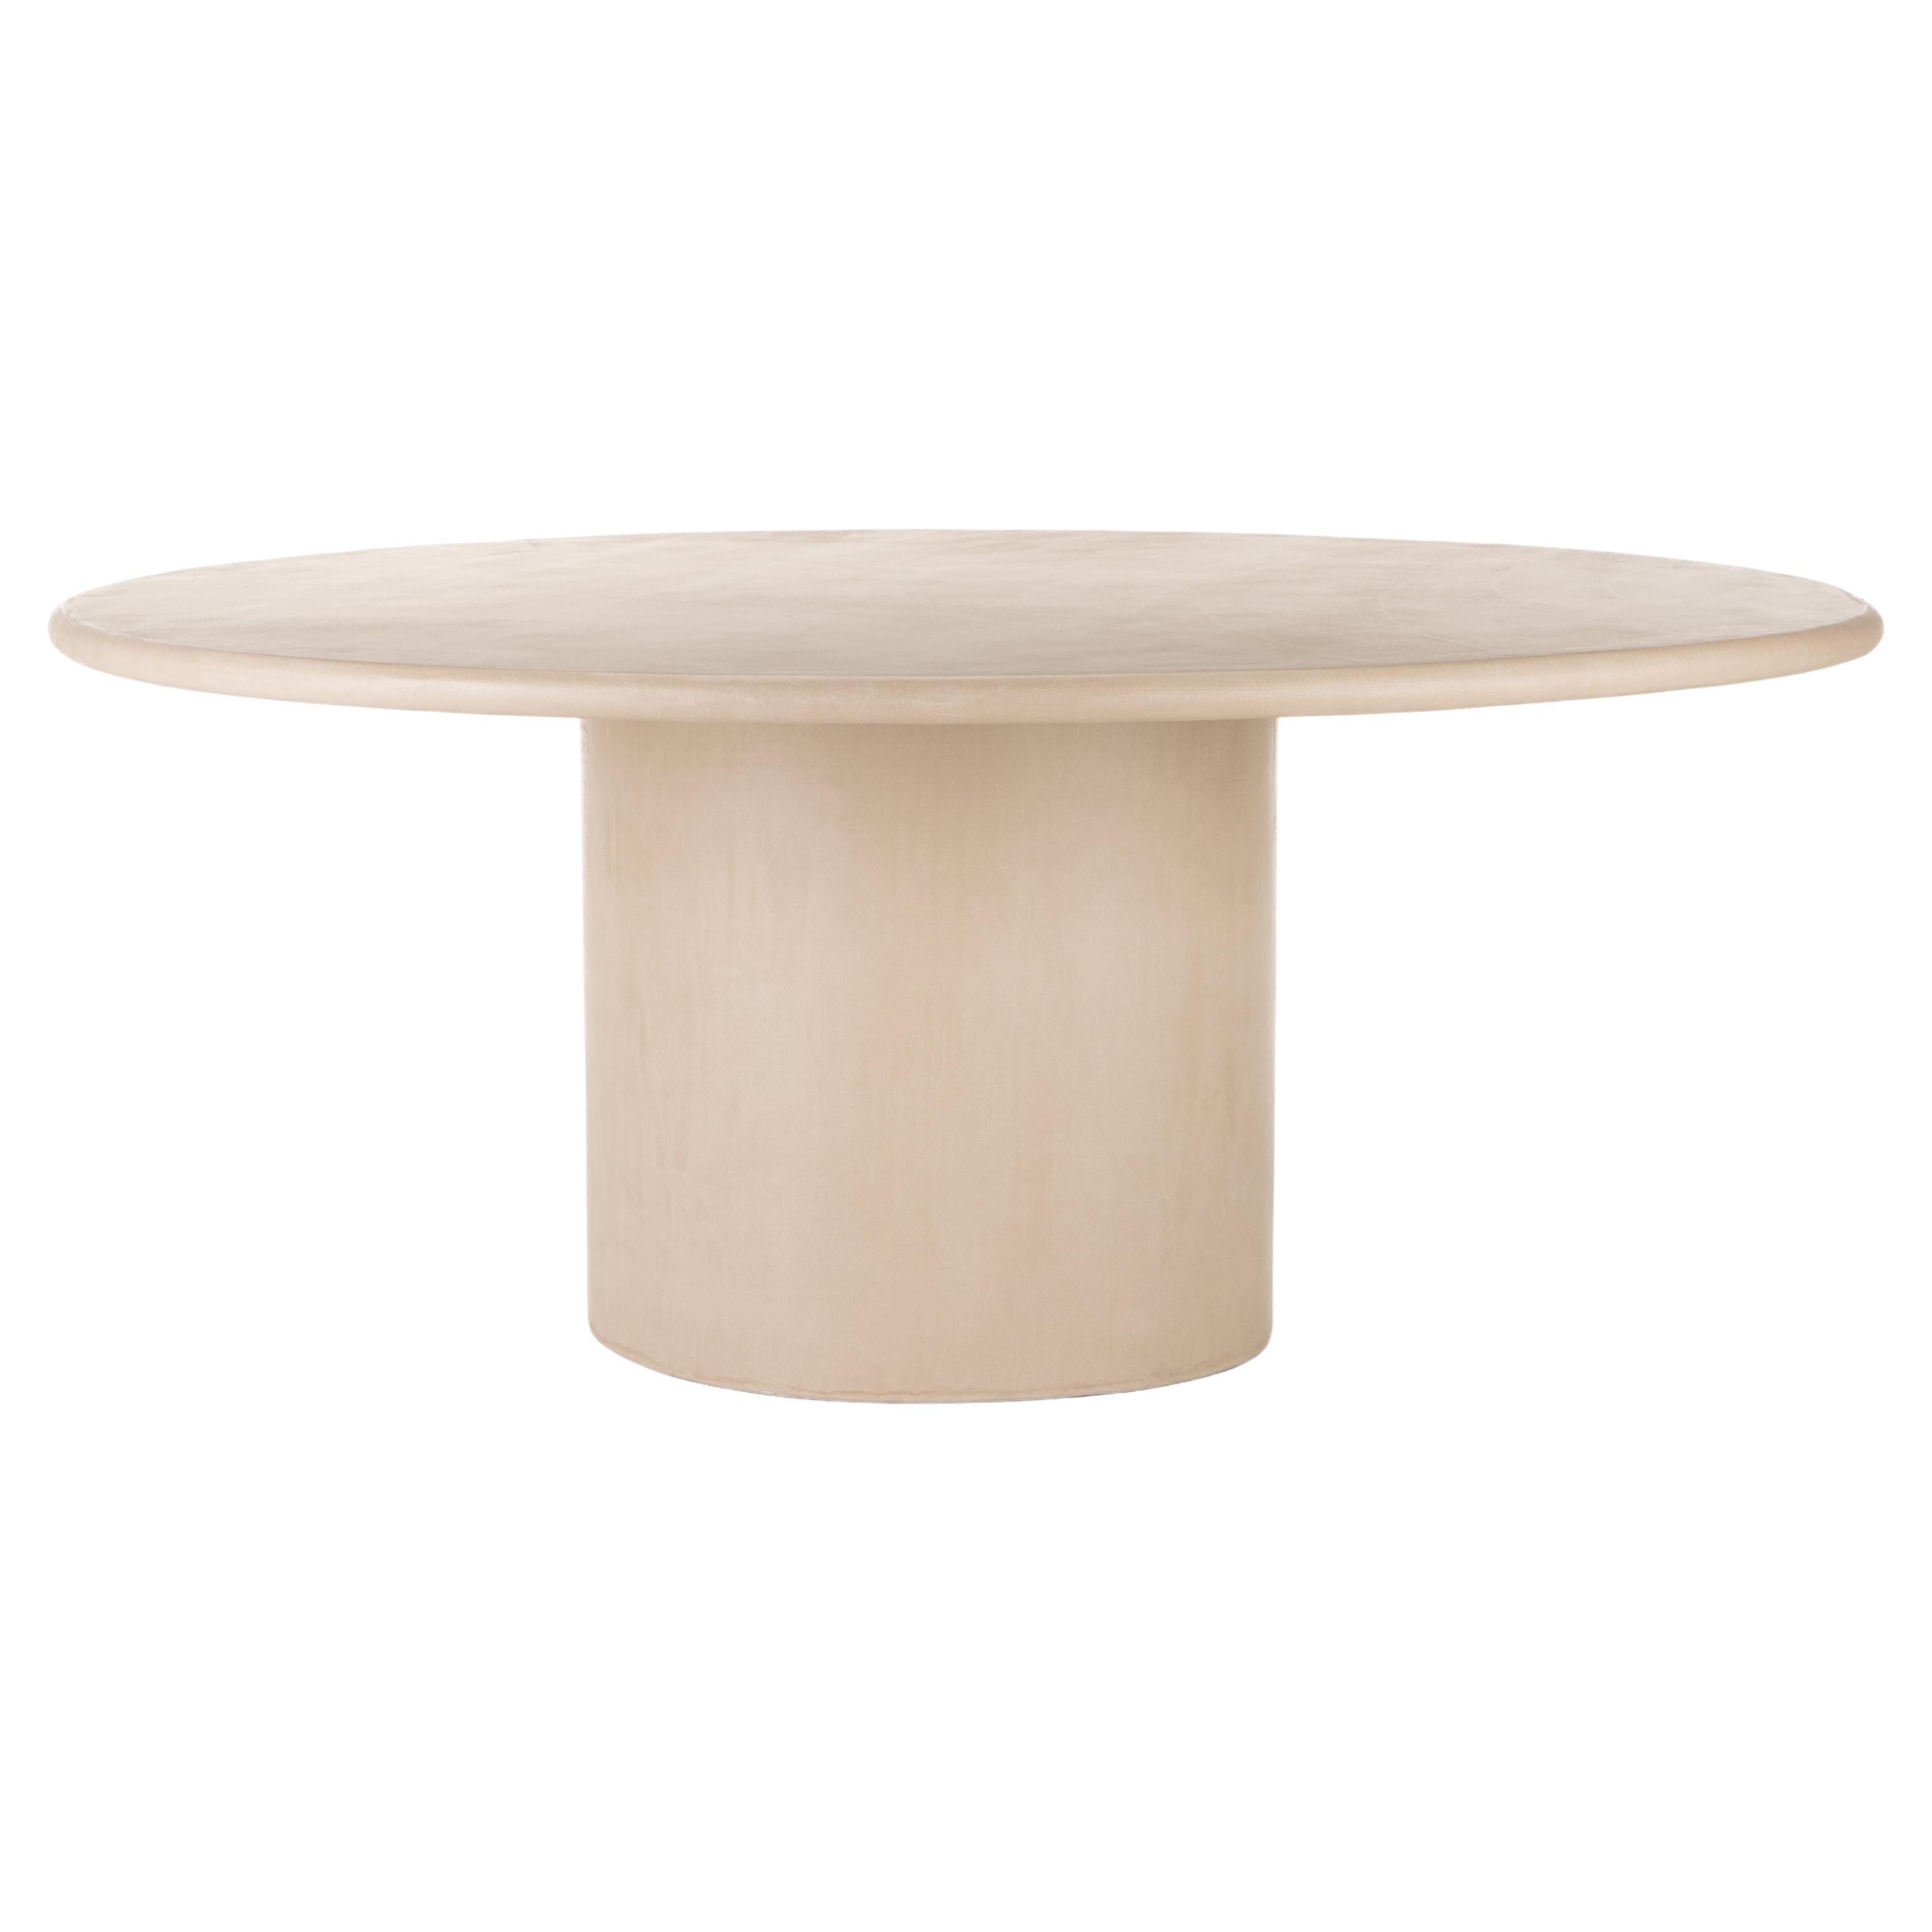 Natural Plaster Dining Table "Sami" 150 by Isabelle Beaumont For Sale